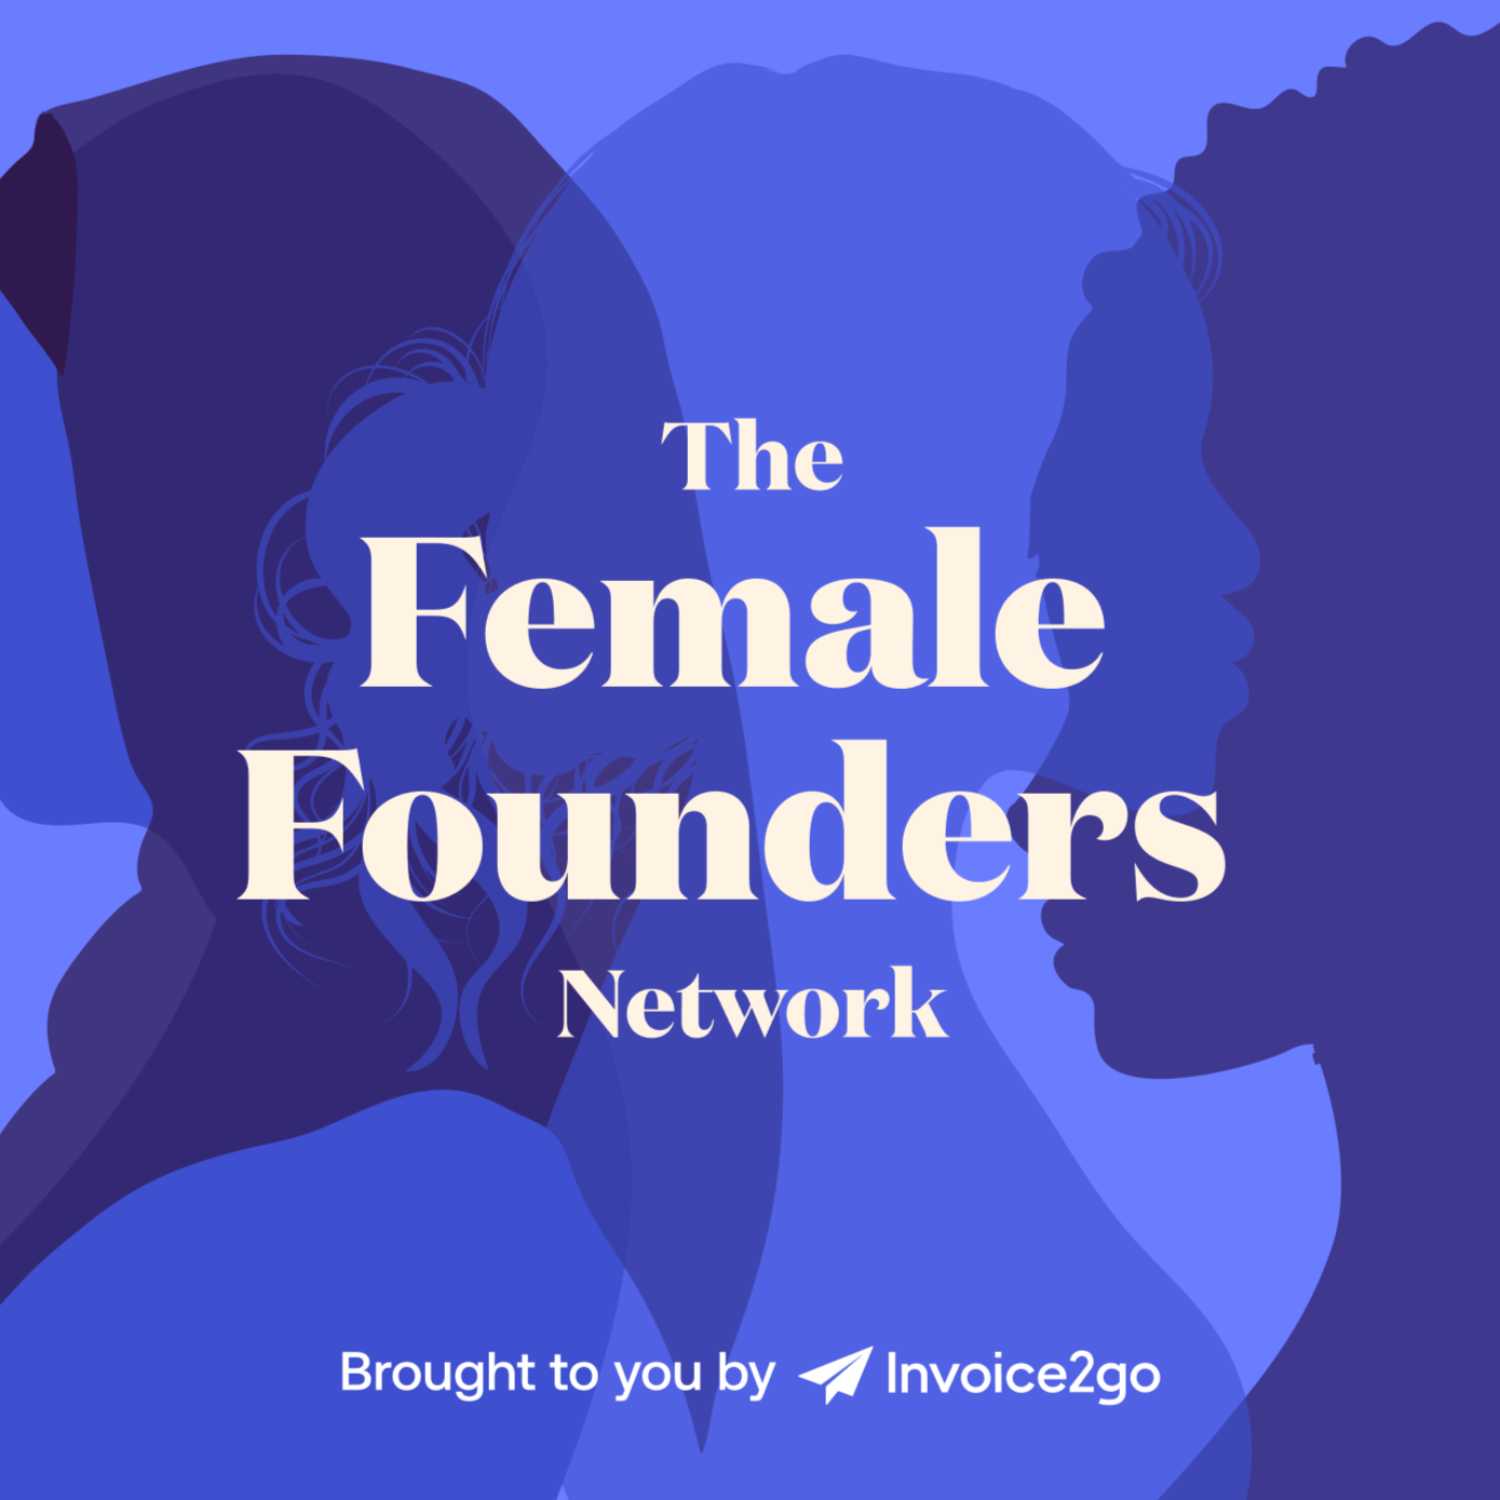 The Female Founders Network